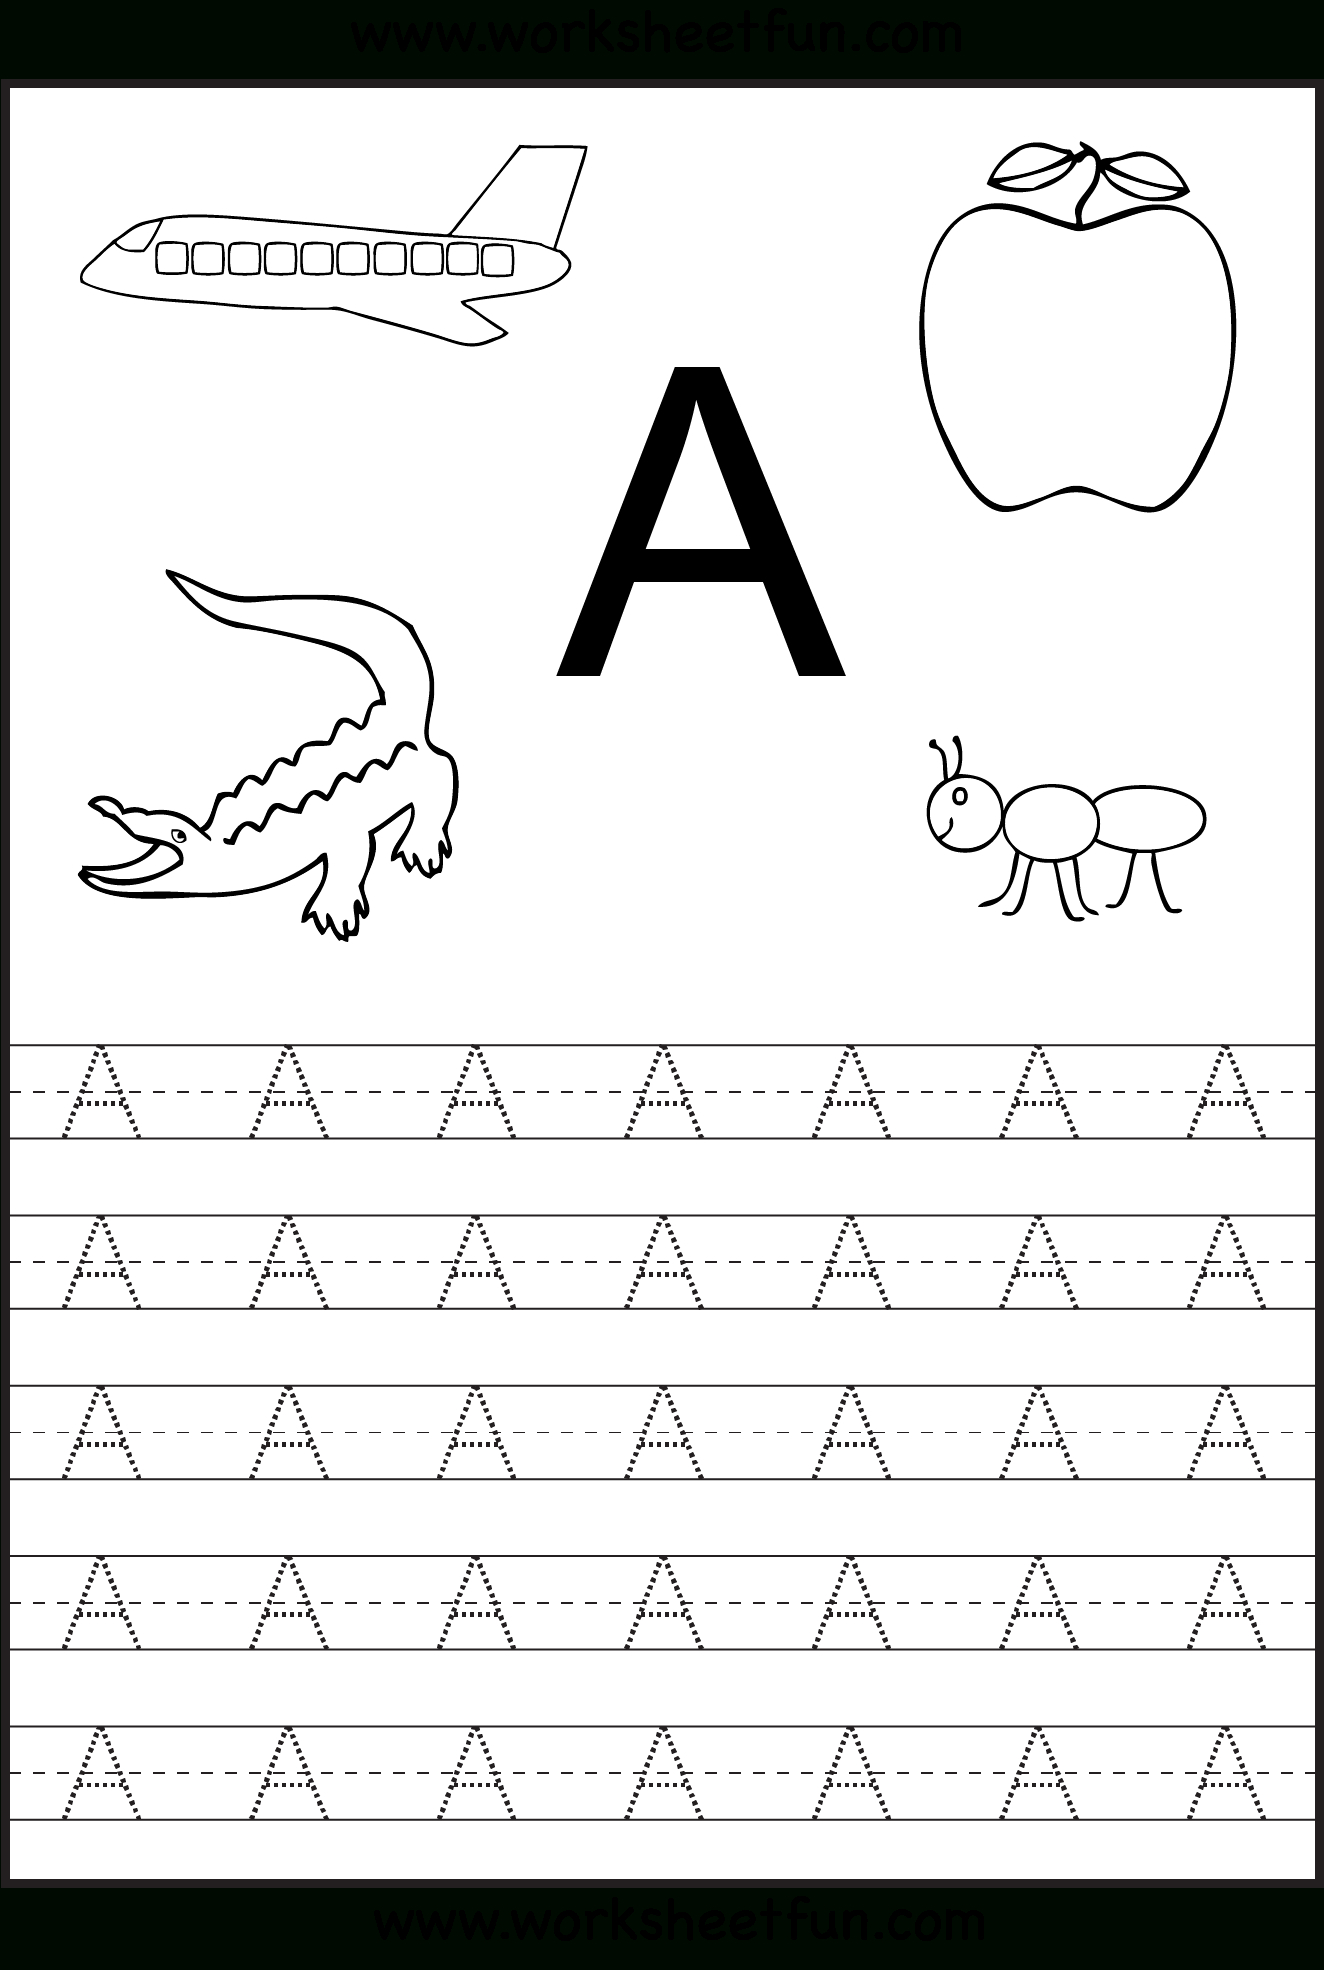 Free Printable Worksheets: Letter Tracing Worksheets For | Capital Alphabets Tracing Worksheets Printable